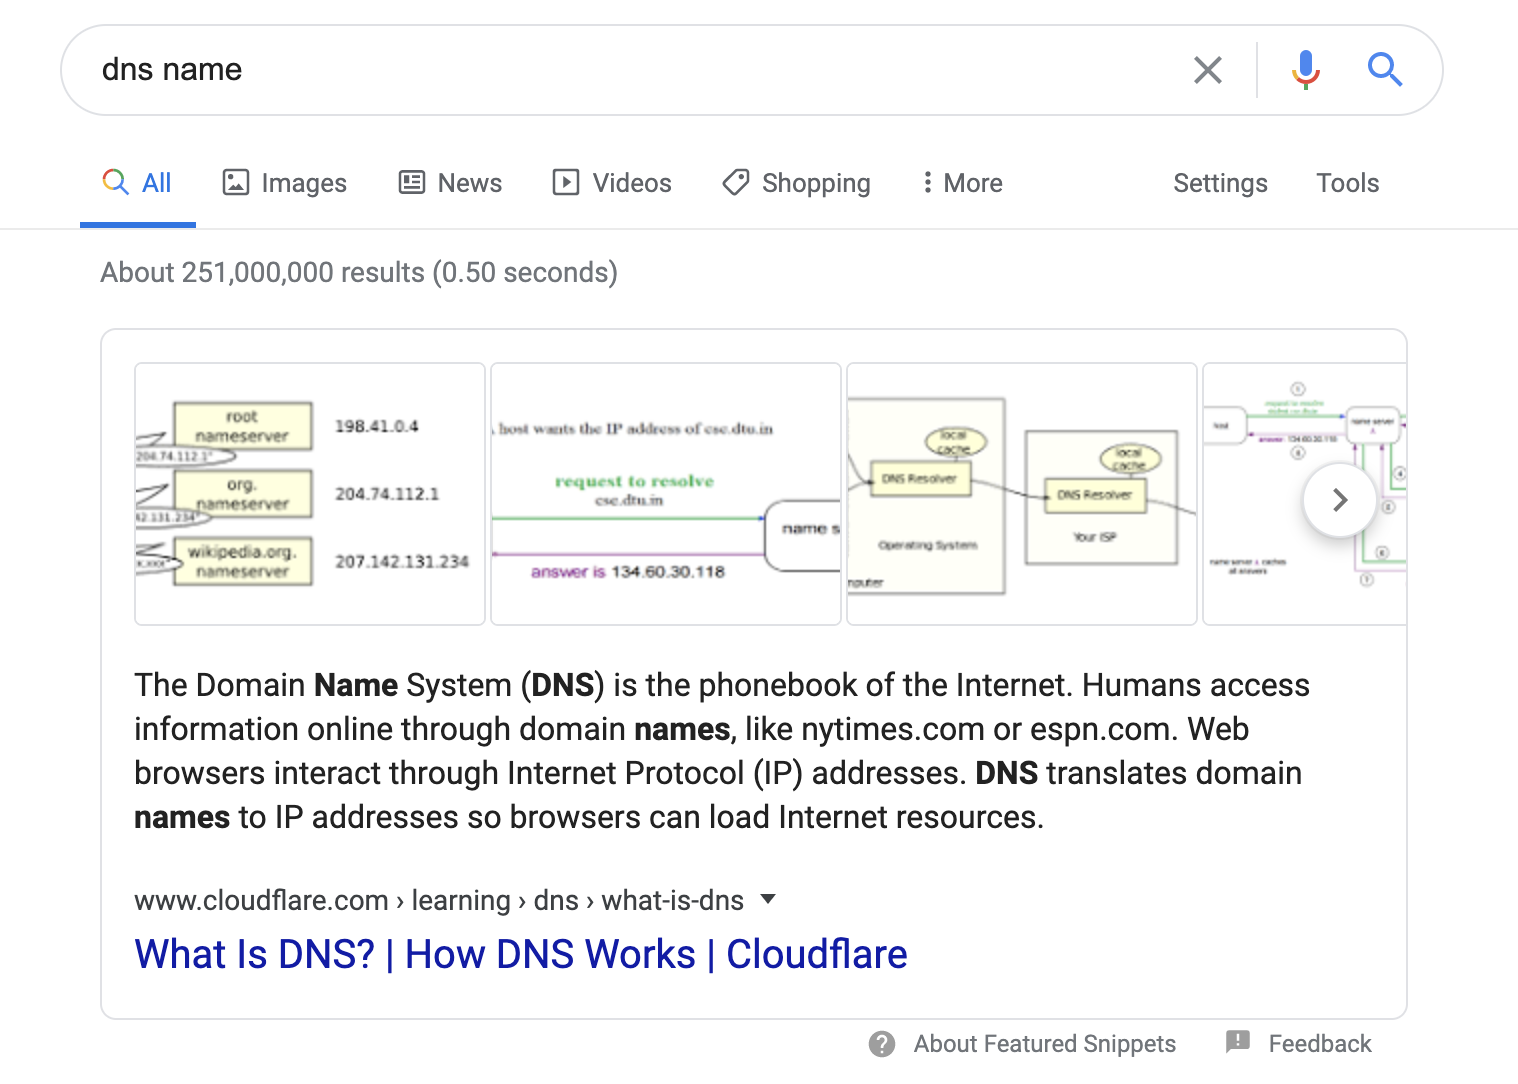 google featured snippet result for dns name query - cloudflare